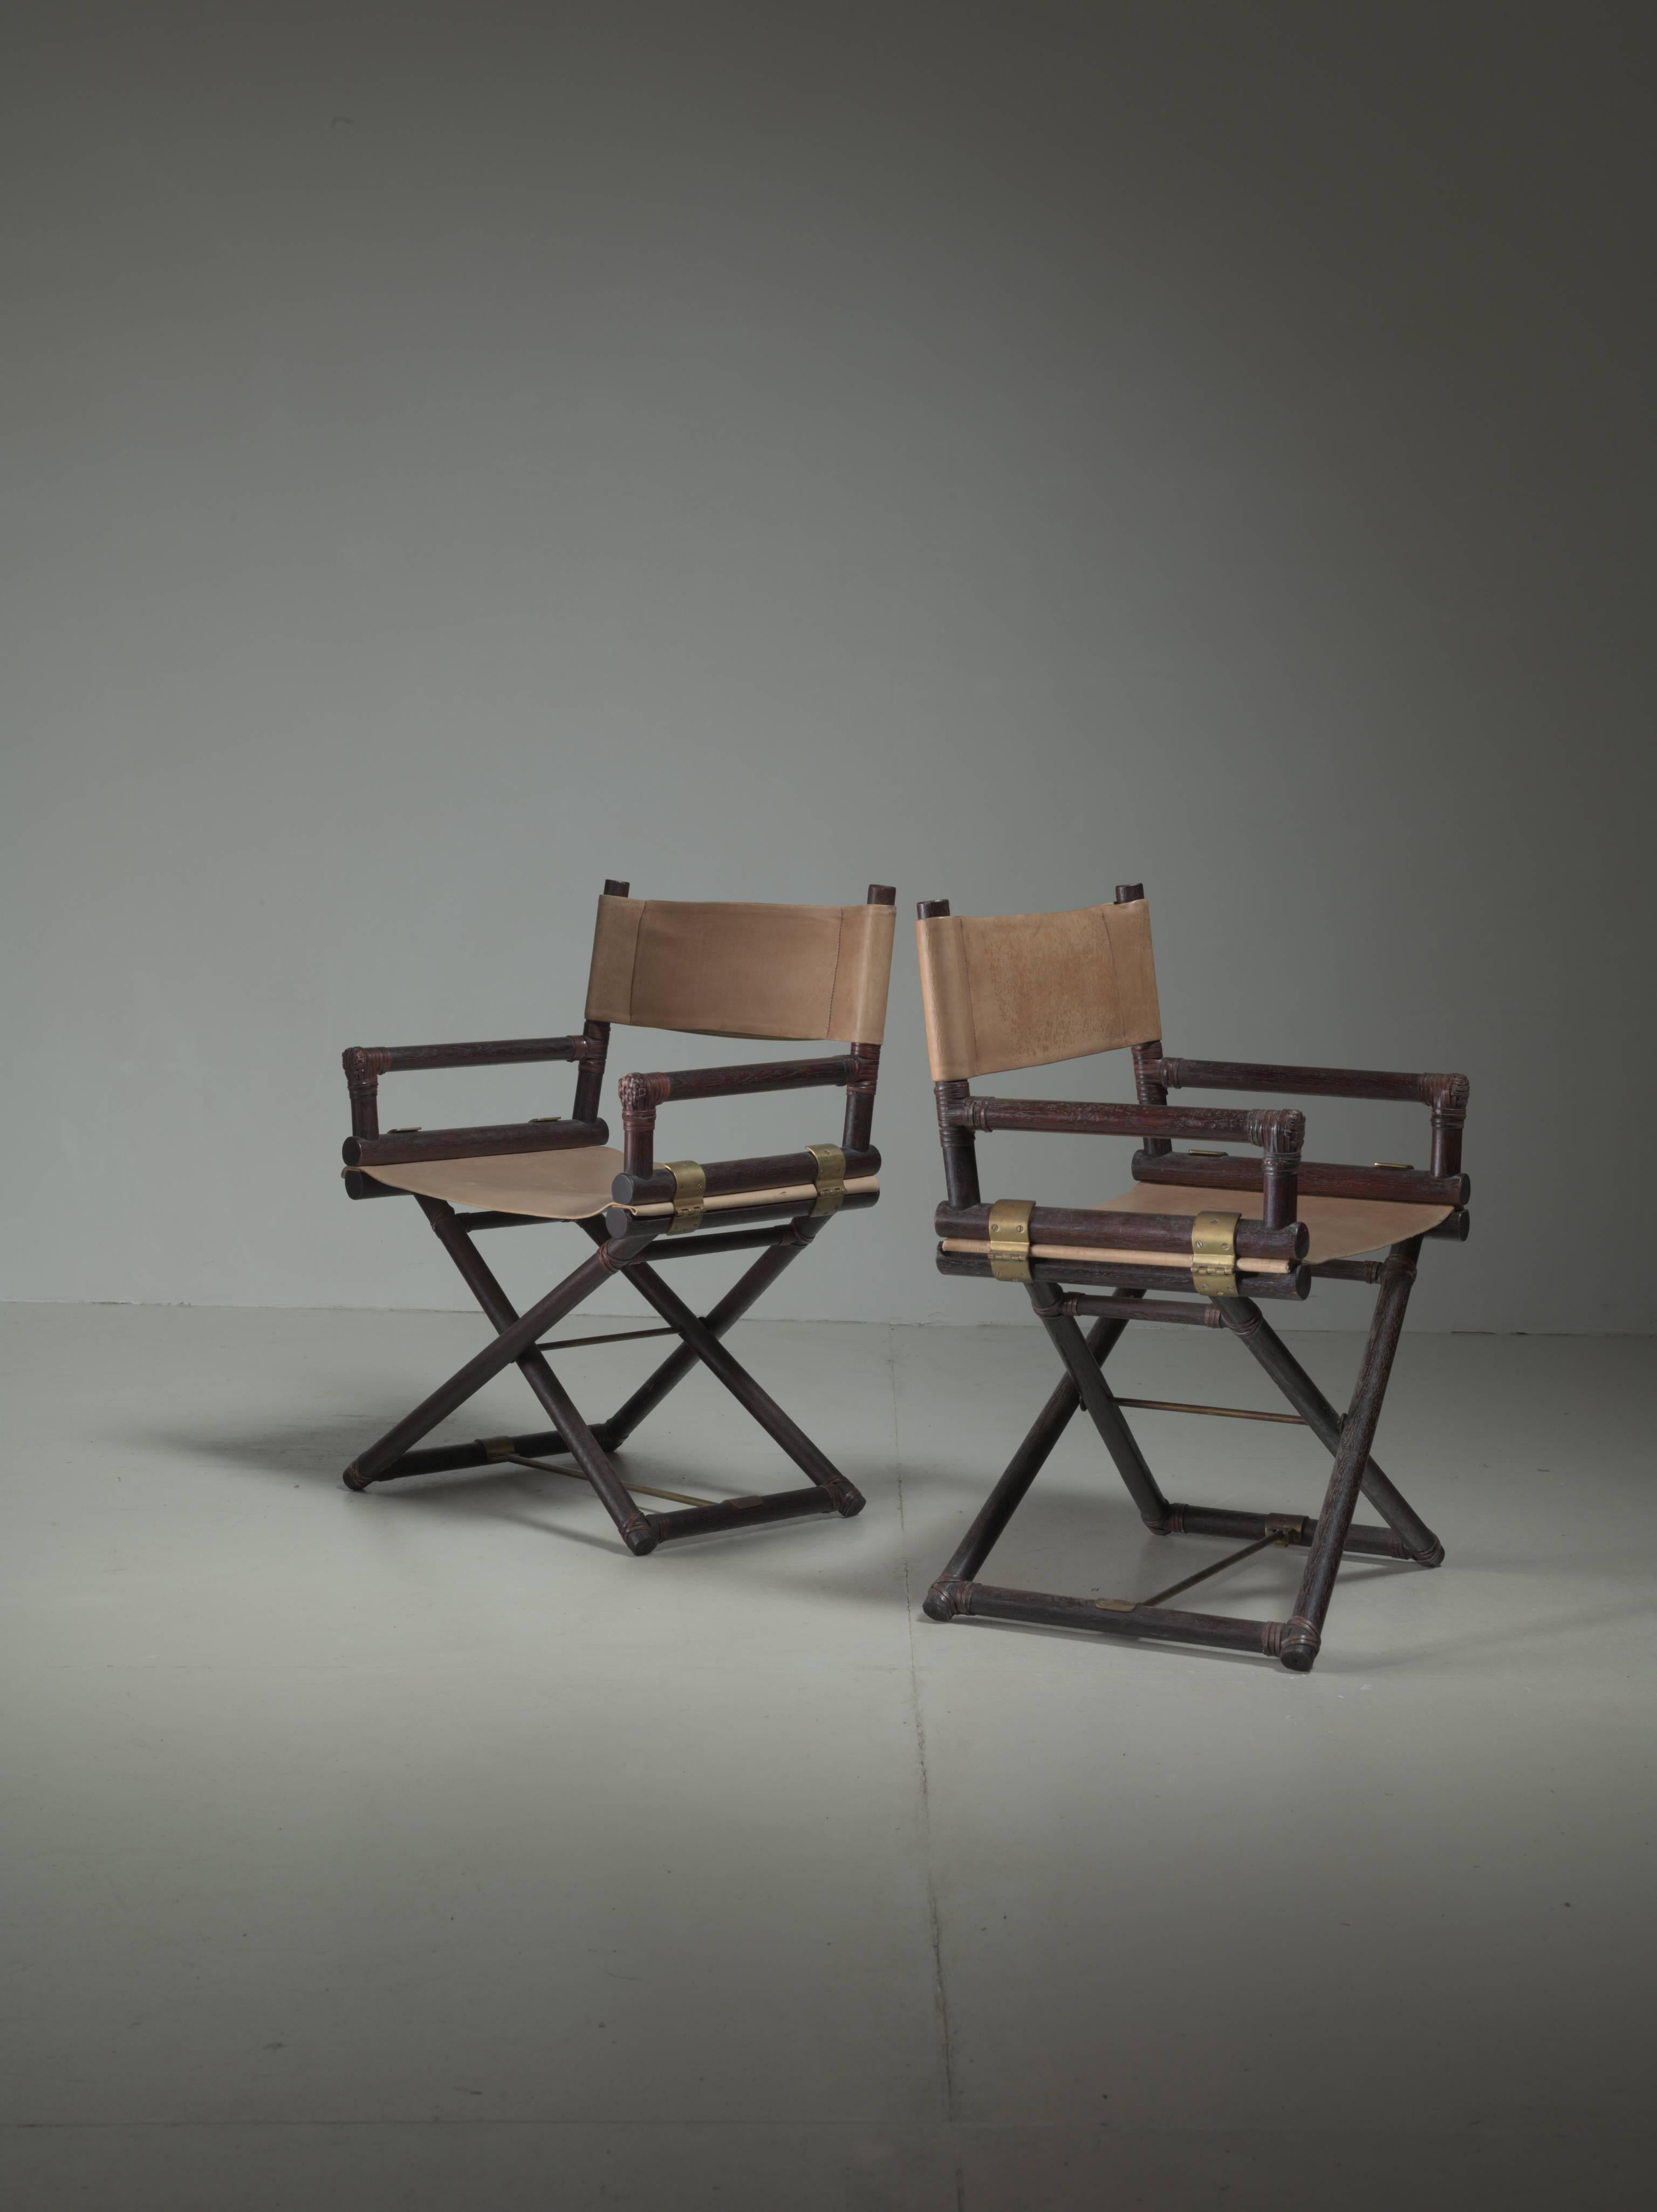 A pair of director's chairs made of stained ash and a sling leather seating and backrest. The connections are made of brass and leather cord.
This model was designed in 1956 for the McGuire Furniture company.
